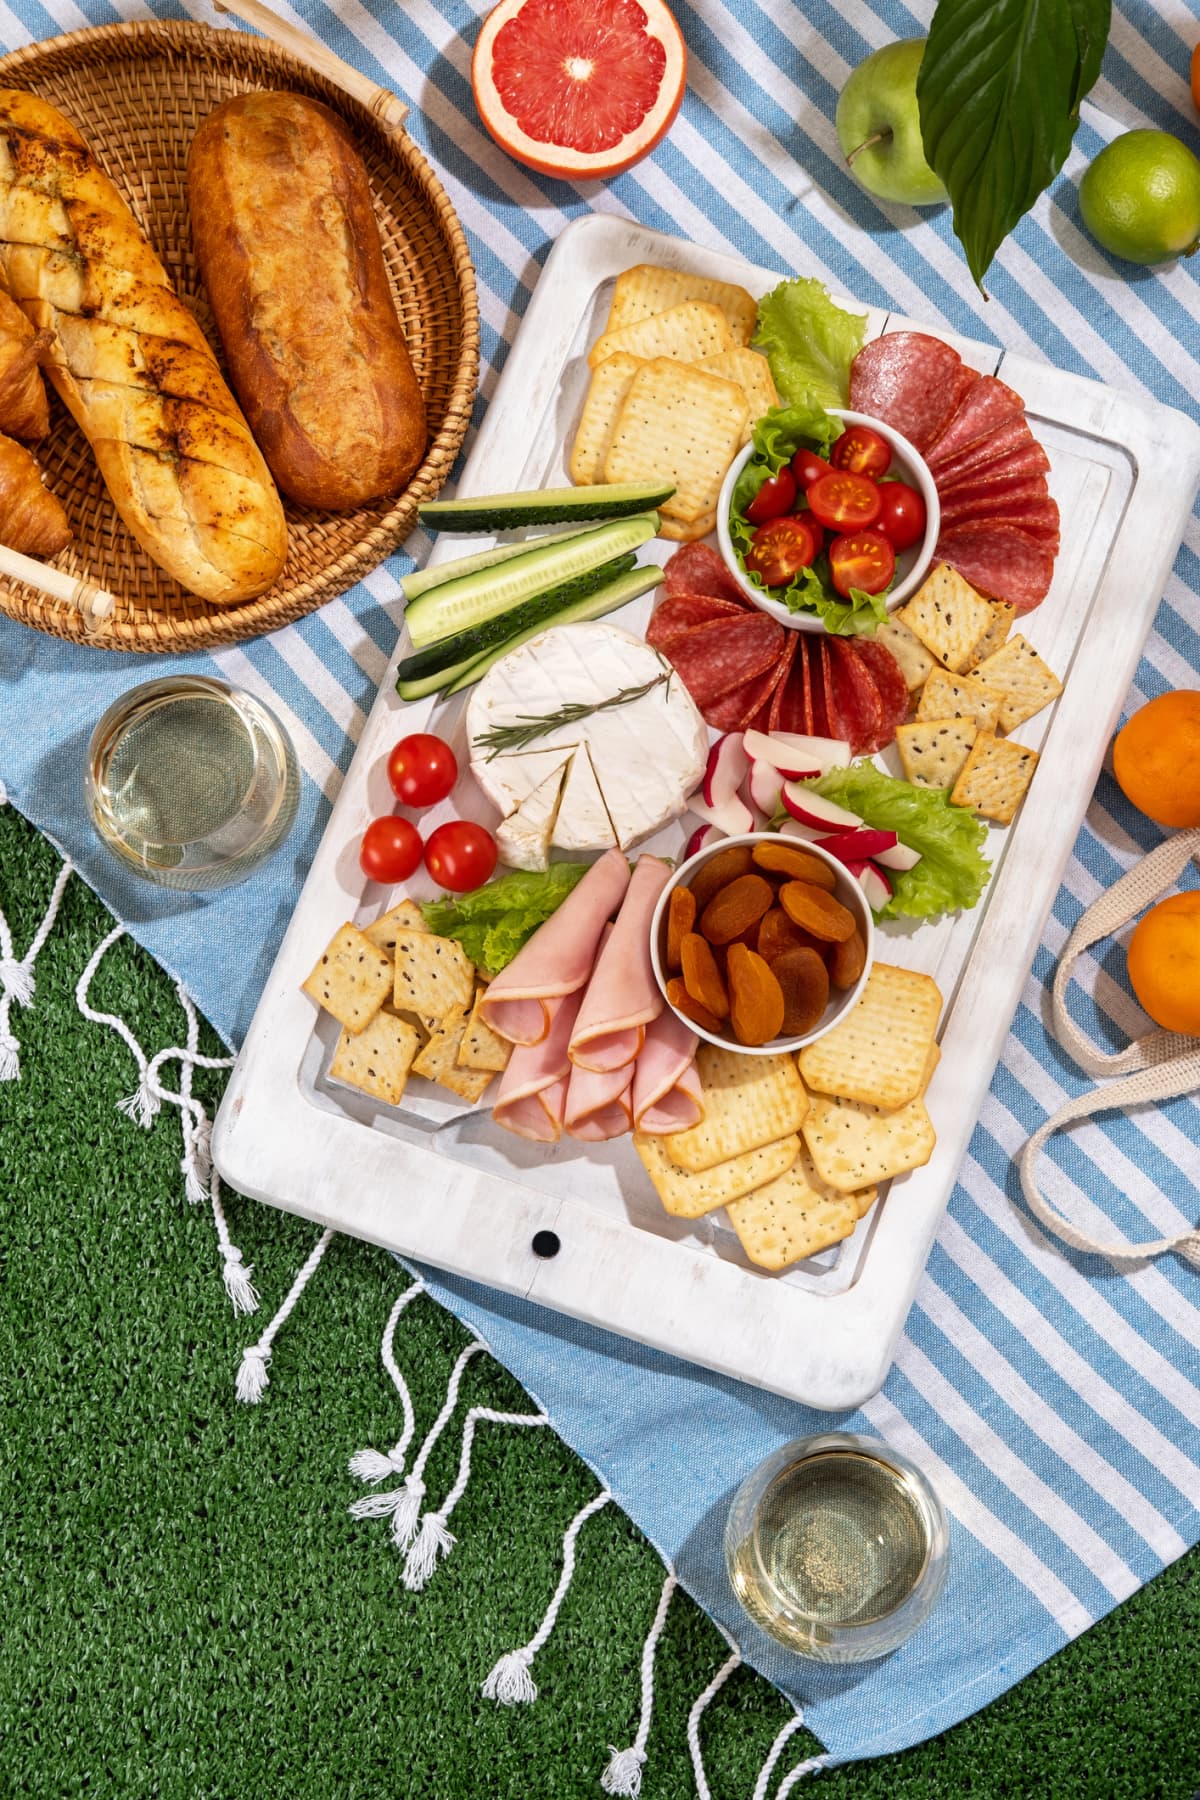 Picnic blanket with charcuterie boards, healthy food and wine